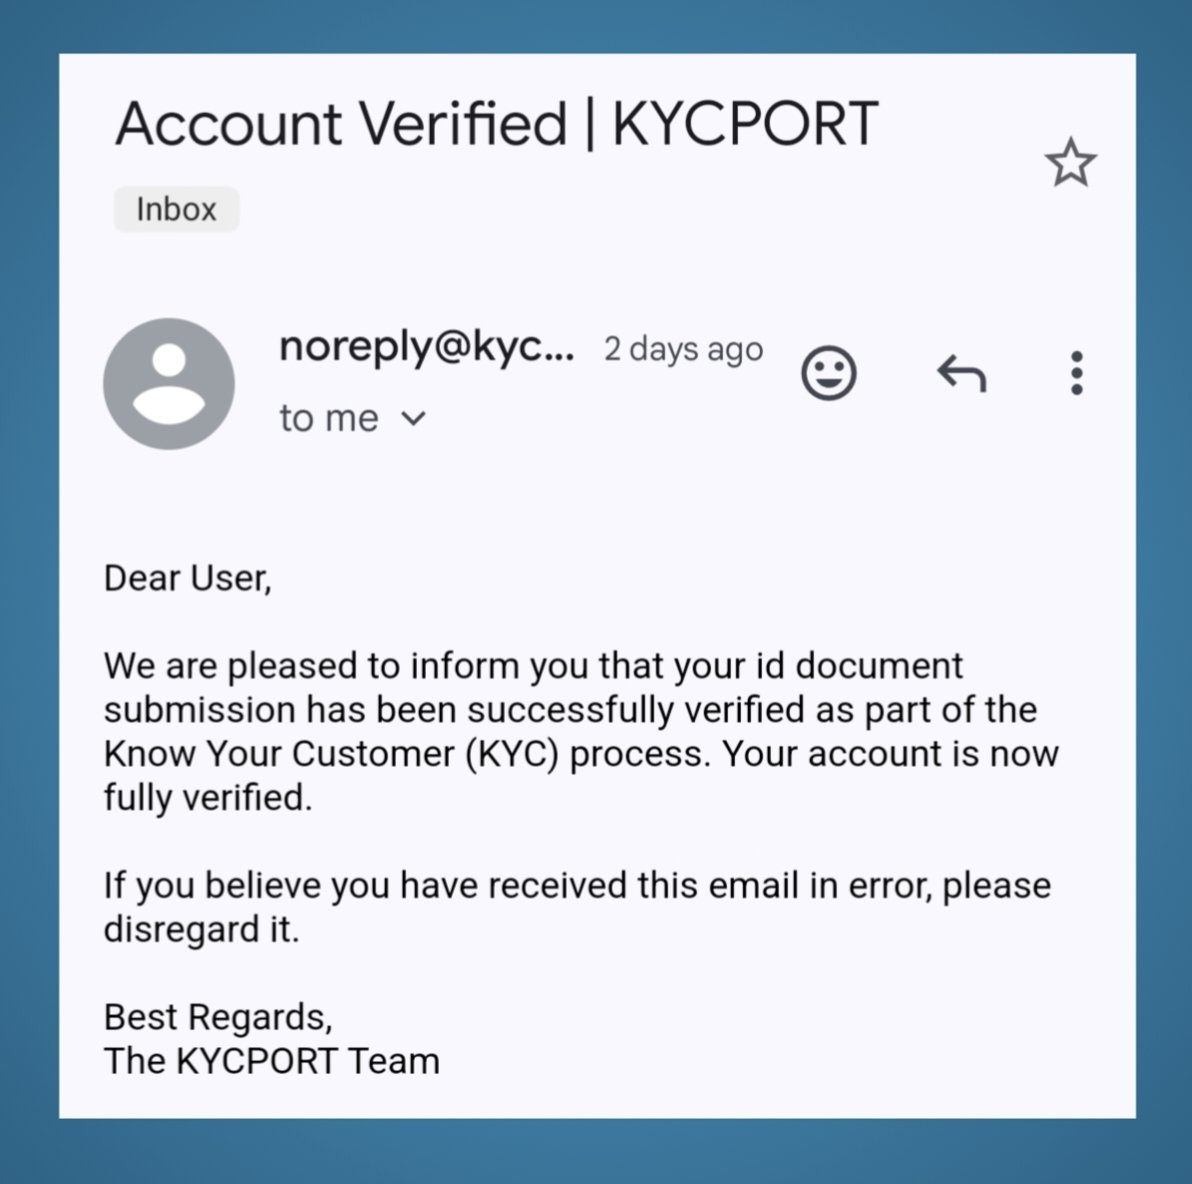 Miners Are Geting P2P KYC Verified Automatically By SidraBank 😍😍

Are You P2P KYC Verified ? Yes or No

$SHC @SchoolHackCoin $ZENT @ZentryHQ #Zentry 
#Sidrabank #NinjaCrypto #NinjaCrypto66 #Sidra #Sidrabank